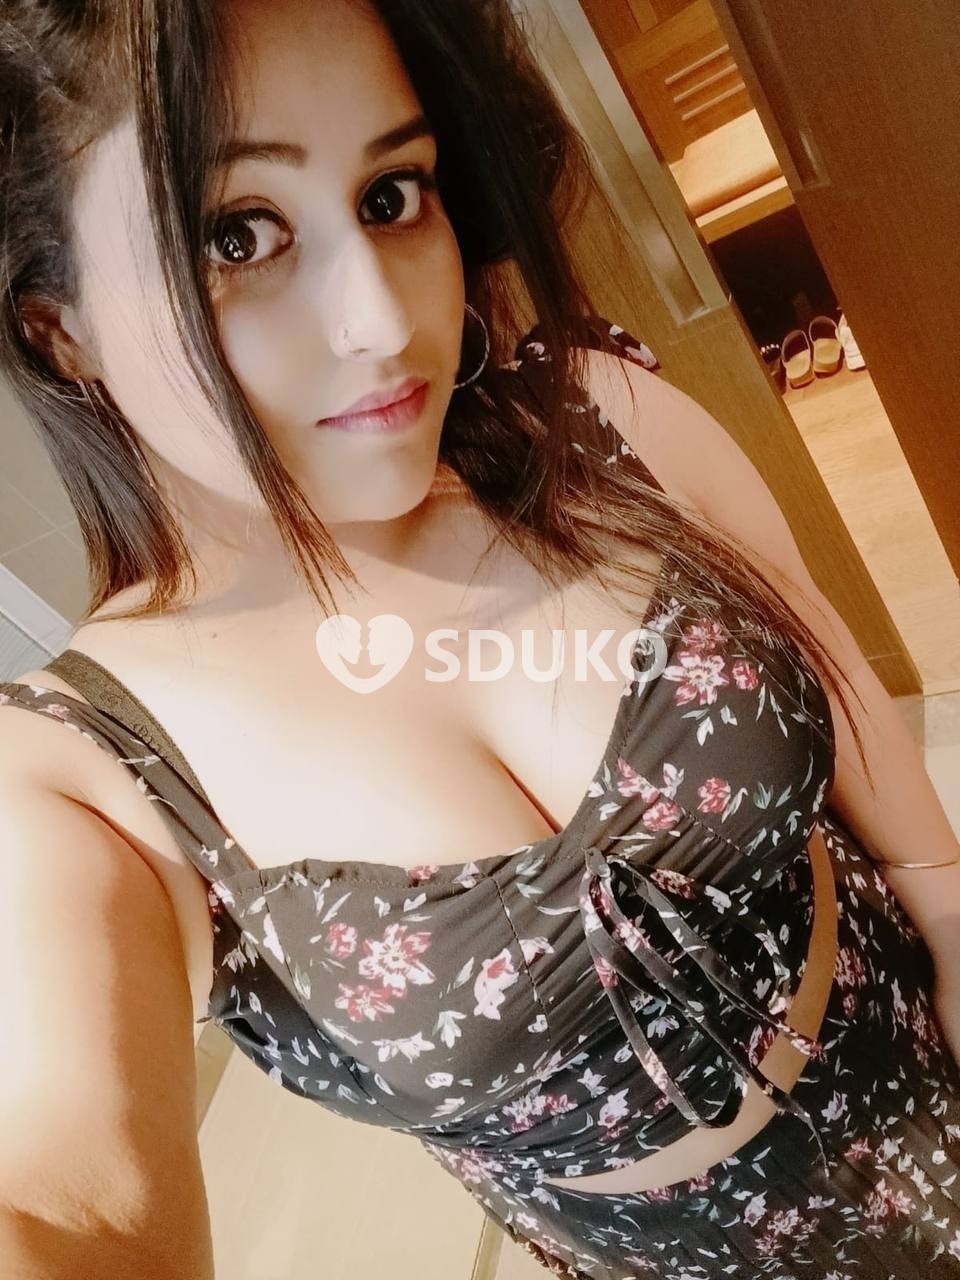 Vastrapur✨💯 ❤️Best call girl service in low price high profile call girls available call me anytime this number